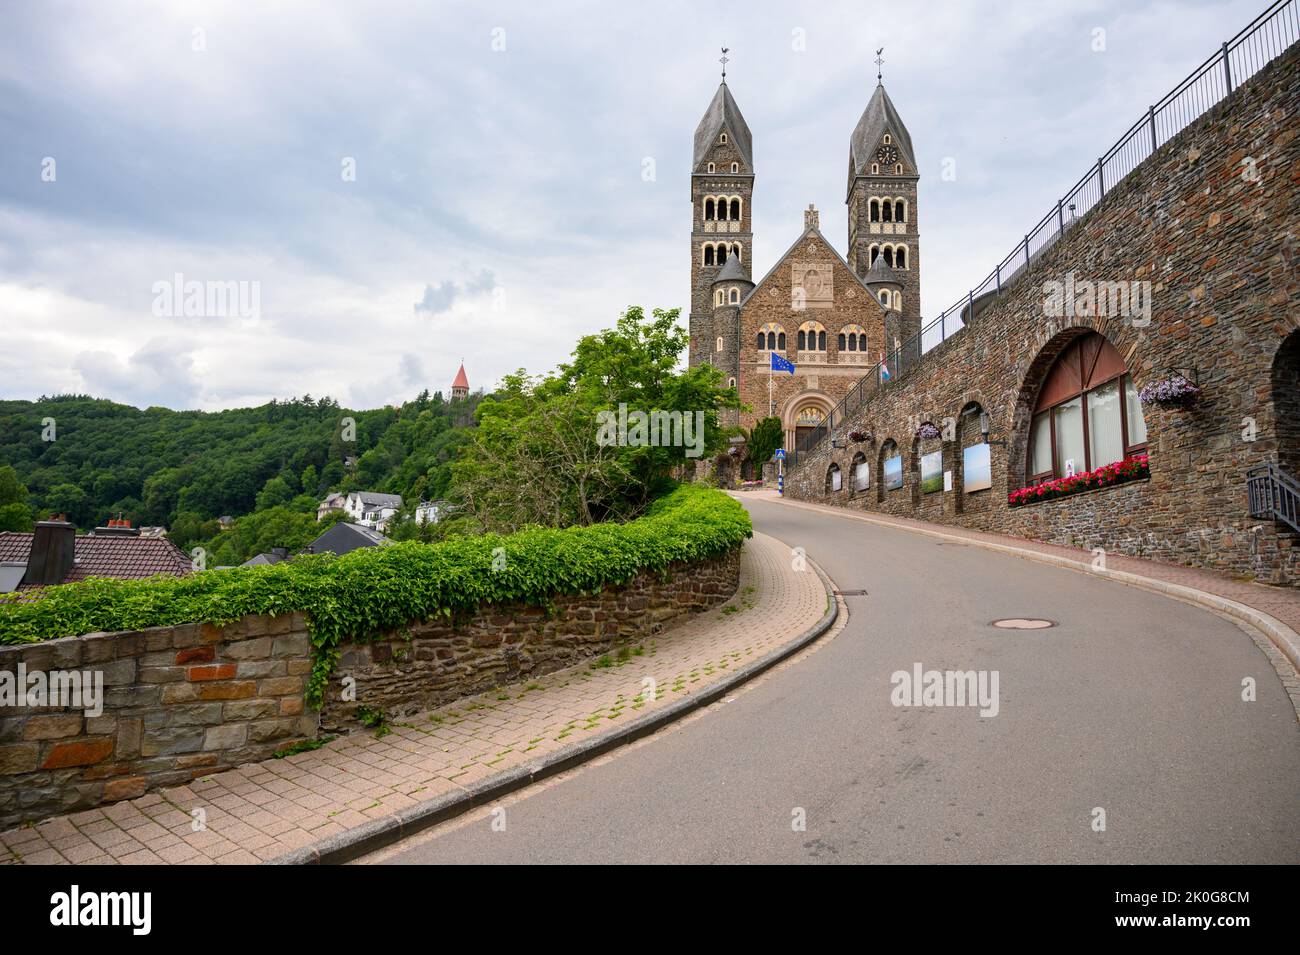 The Church of Saints Cosmas & Damian in Clervaux, Luxembourg. Stock Photo